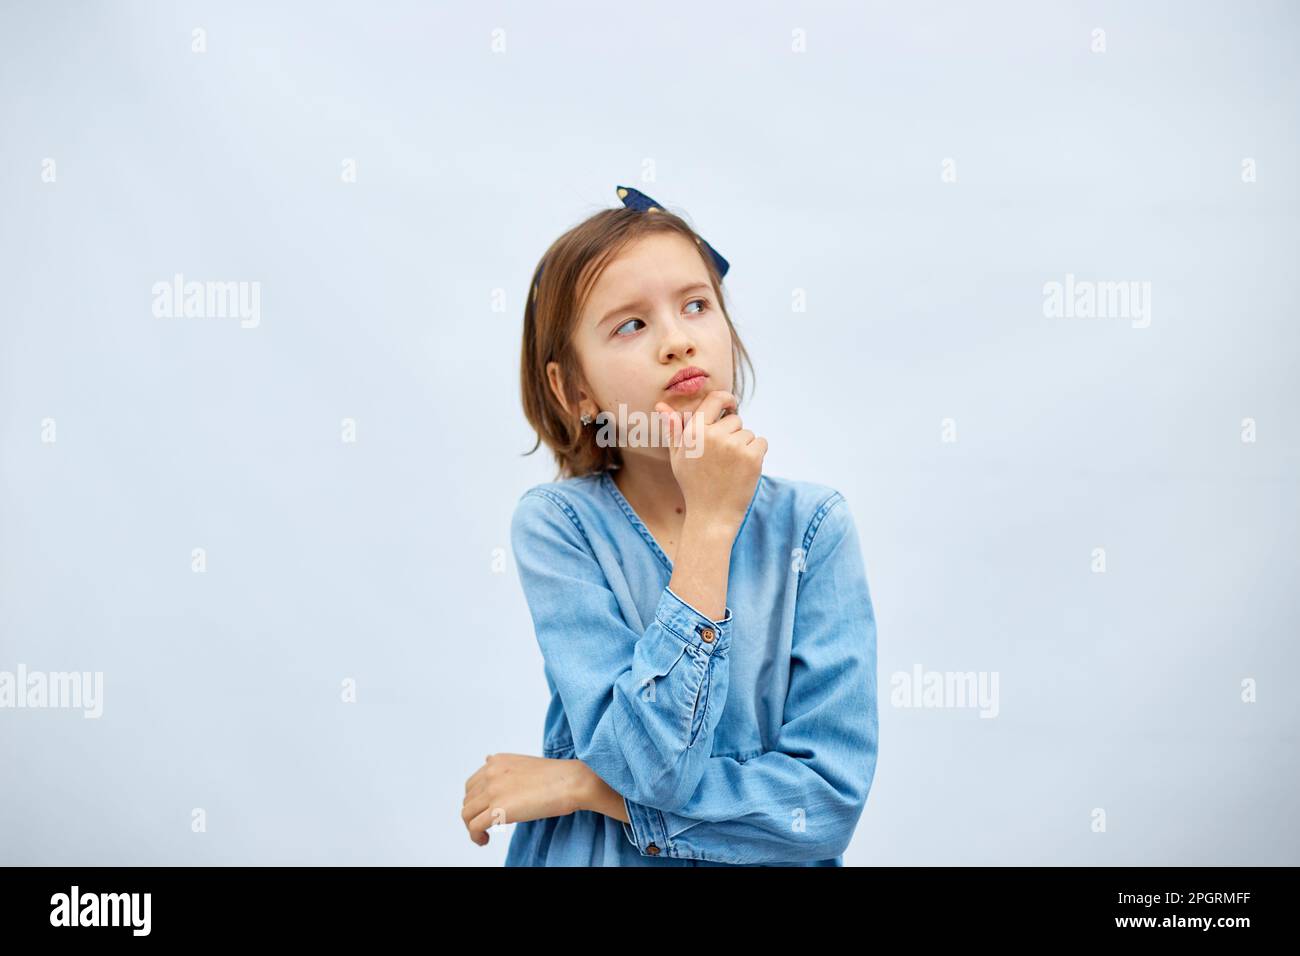 Thoughtful teen girl child wearing jeans dress with finger thinking or considering, have an idea in studio on white background, making decision imagin Stock Photo